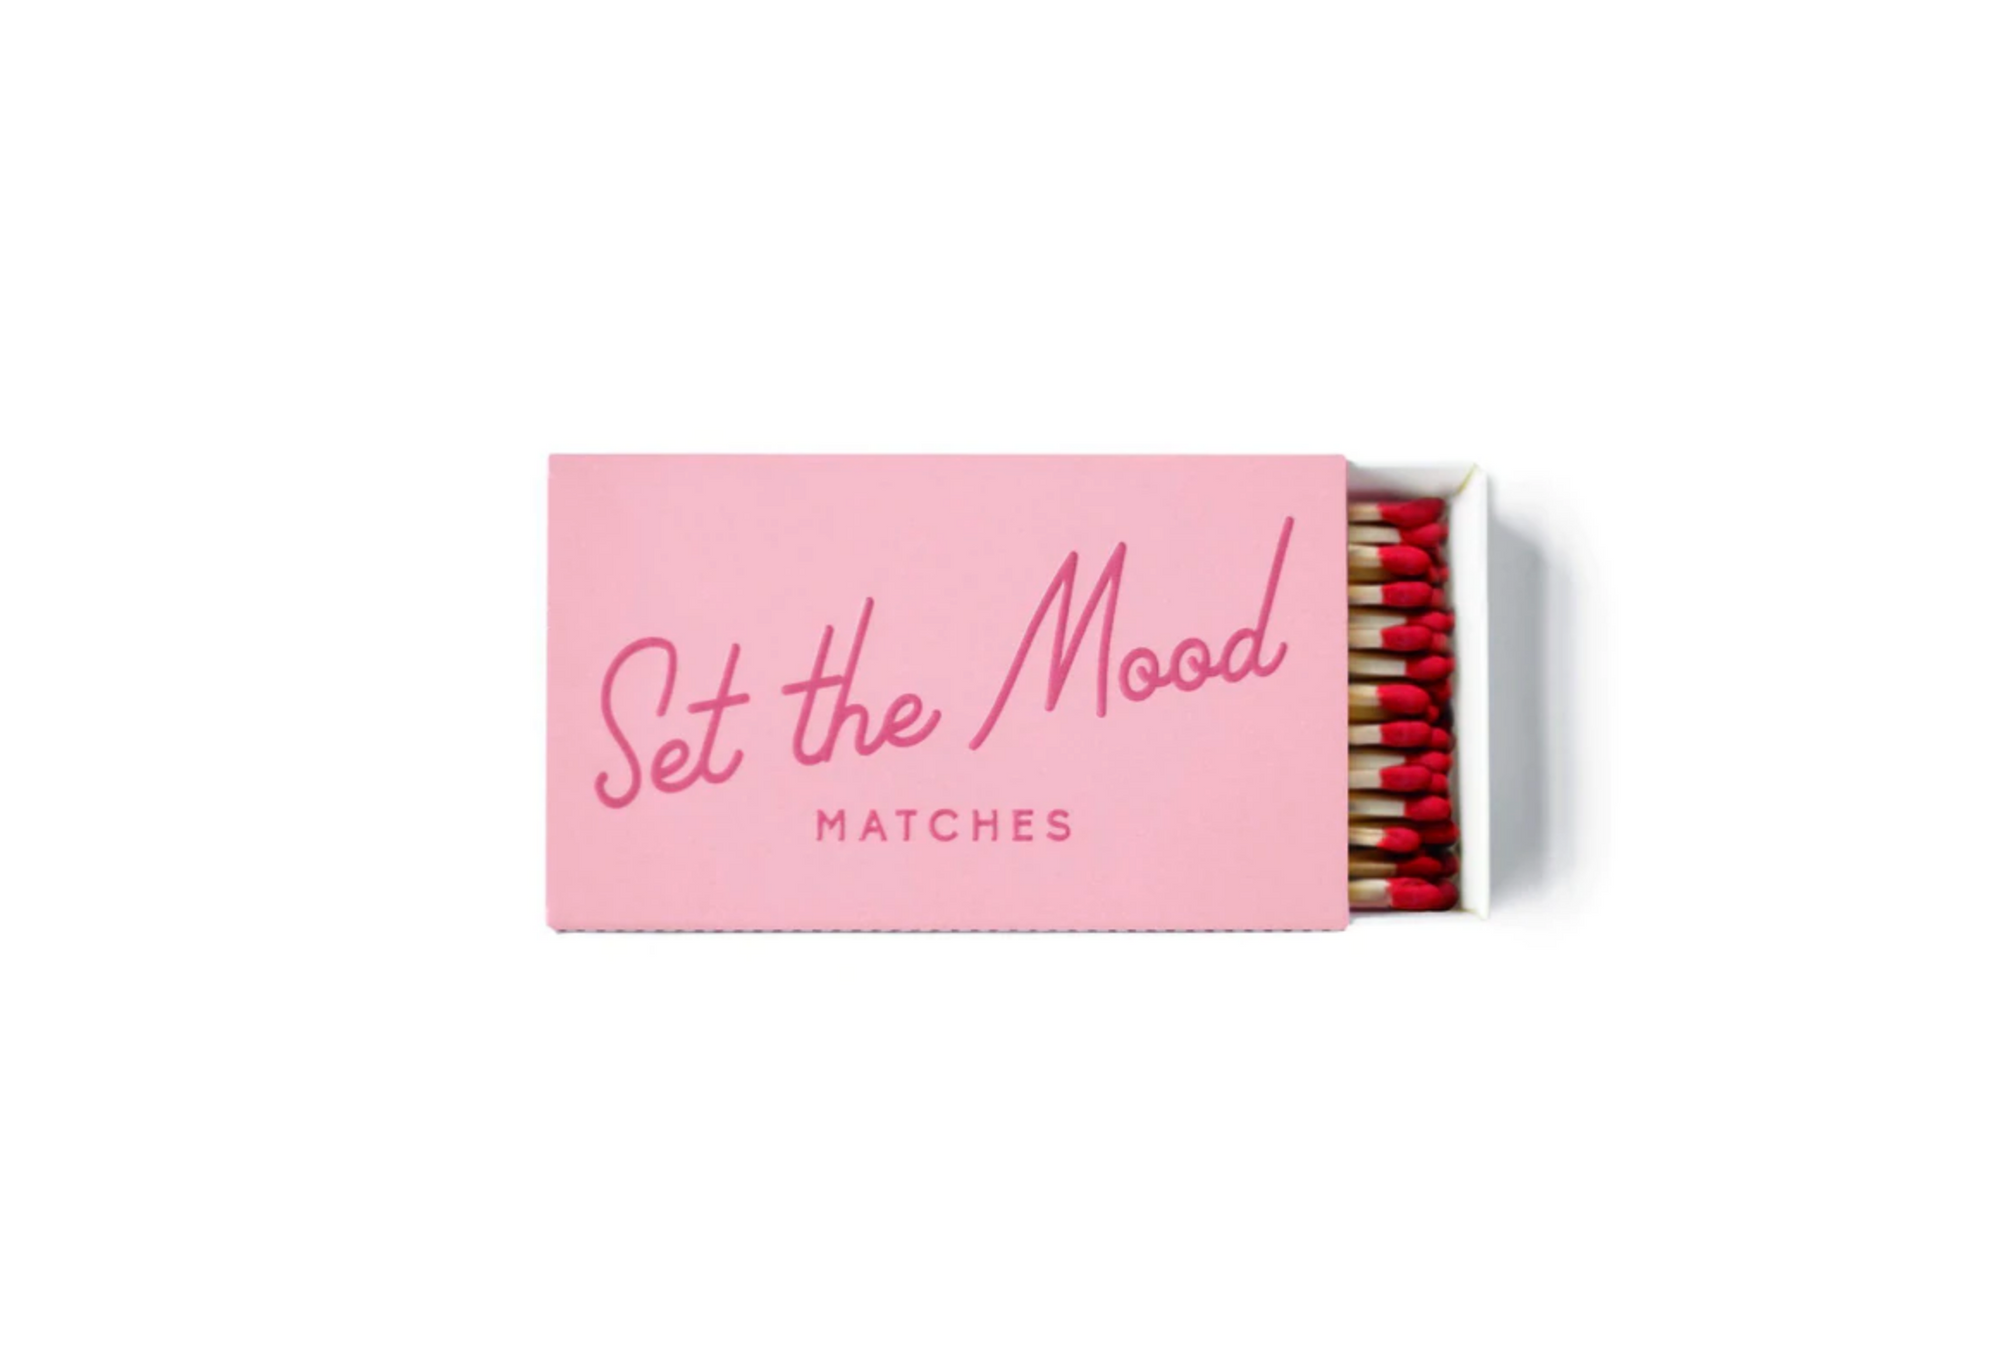 Matches - "Set the Mood" - Heart of the Home PA